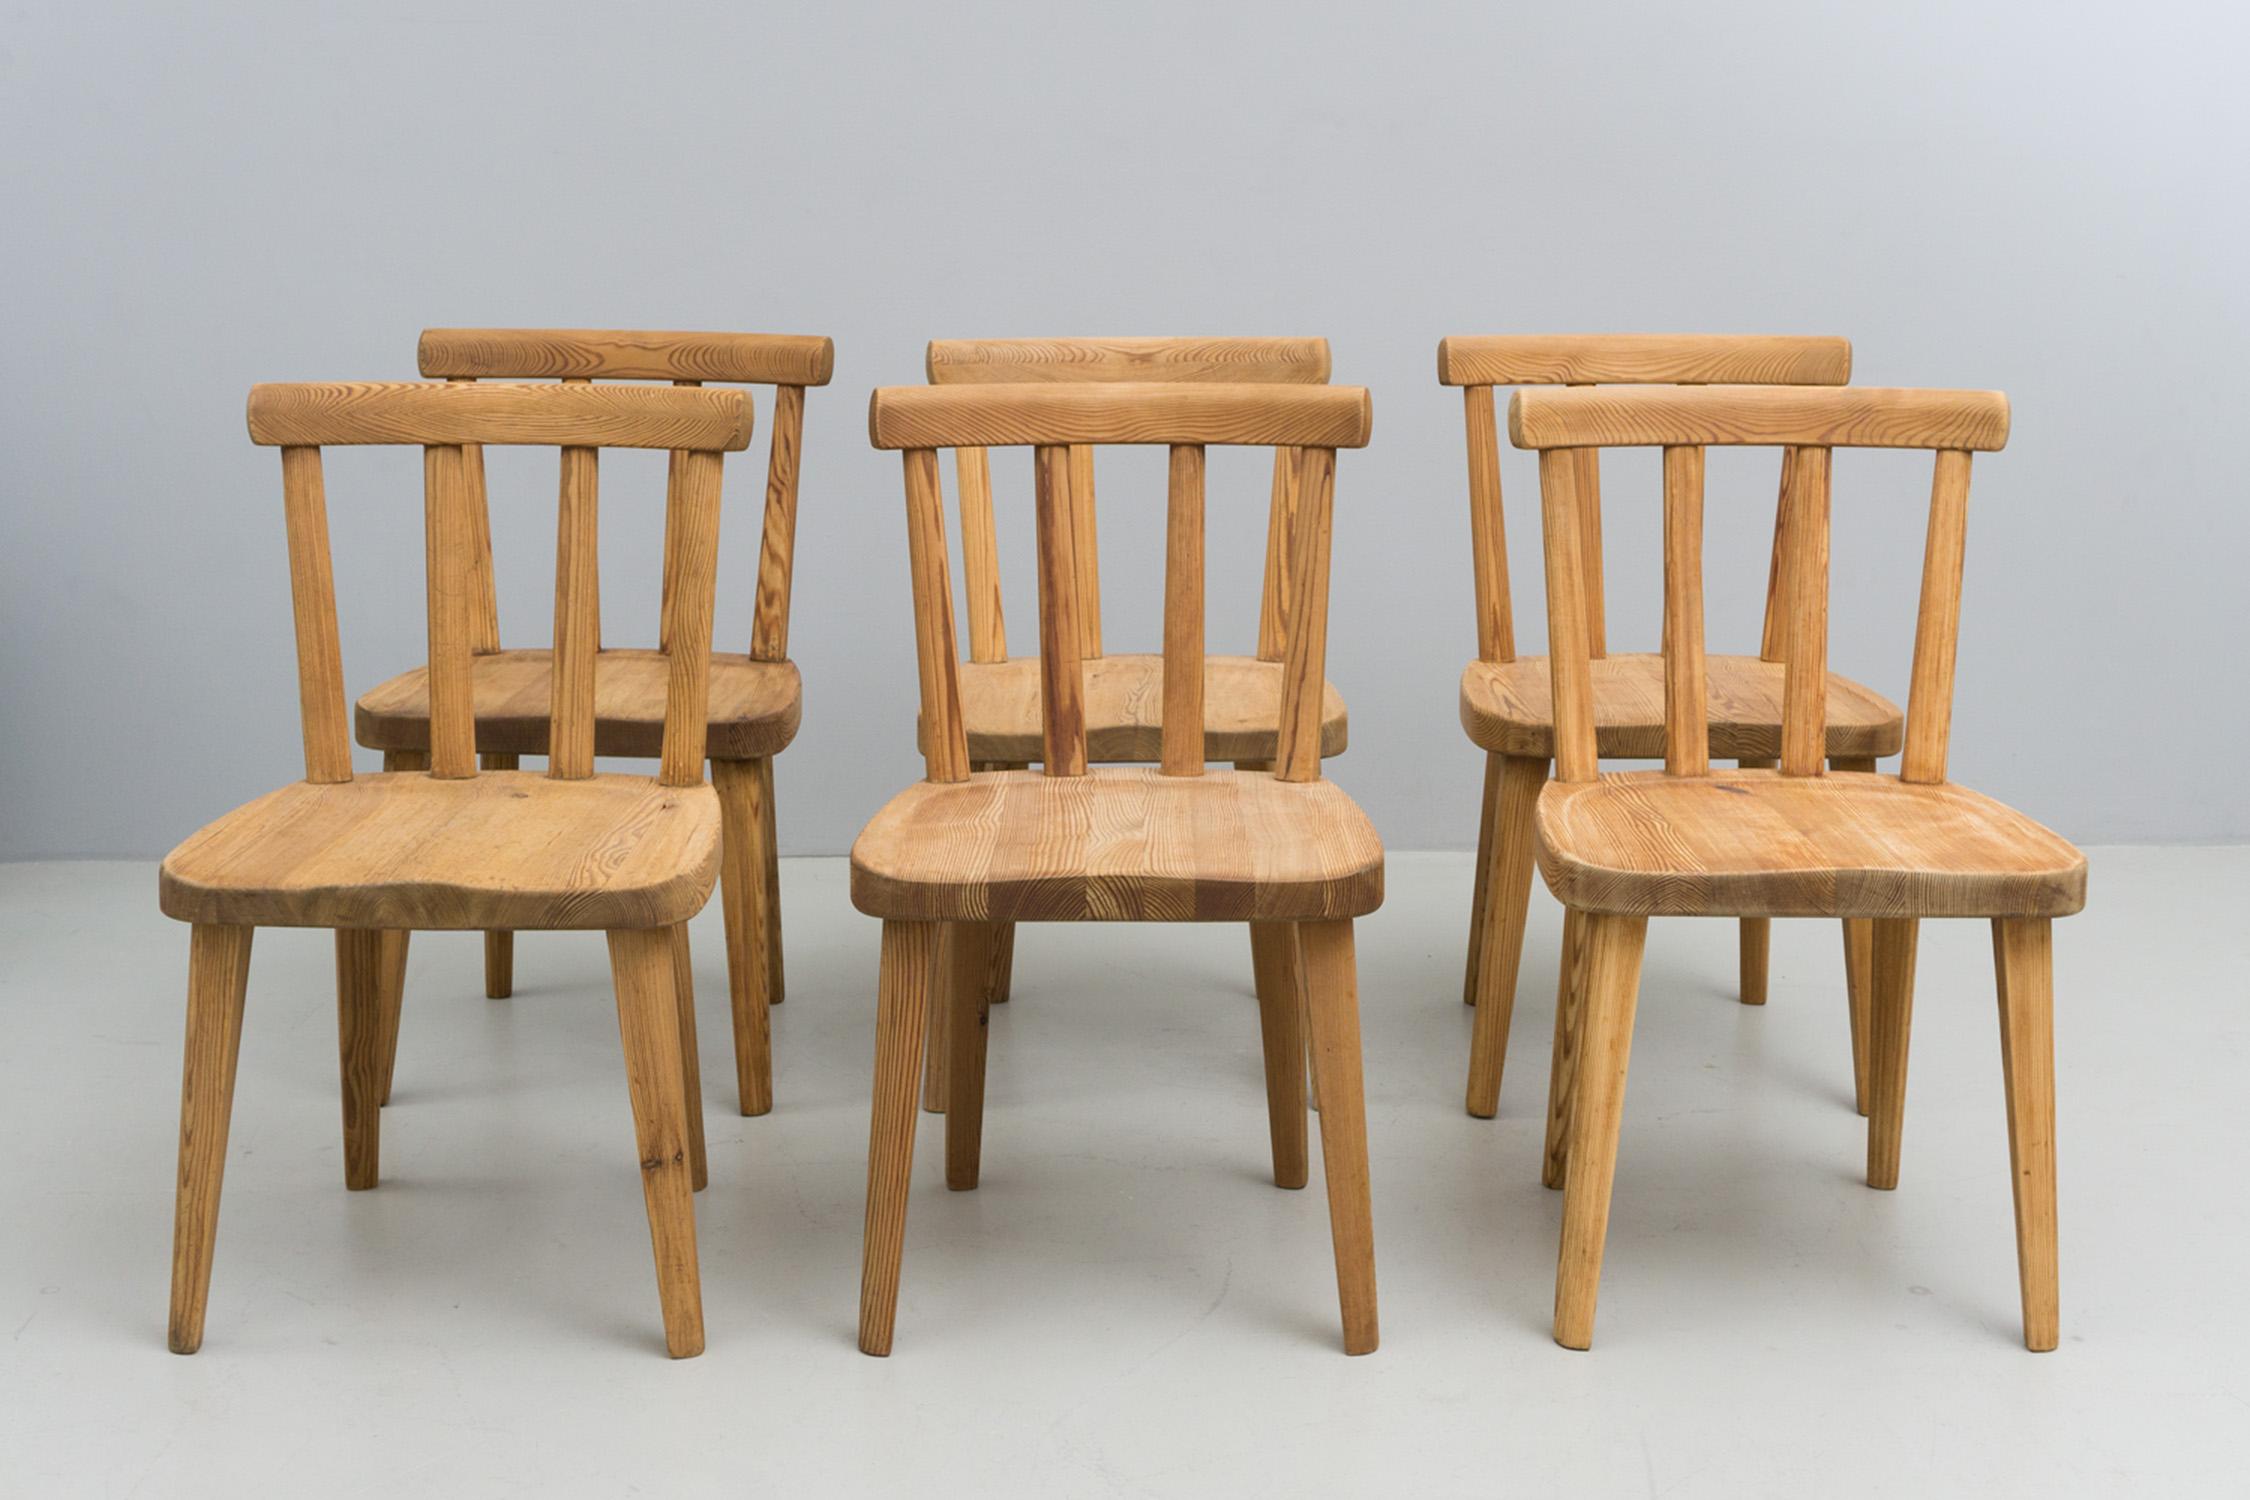 Modern Set of Swedish Pine Wood Chairs, 'Uto' by Axel Einar Hjorth, 1930 For Sale